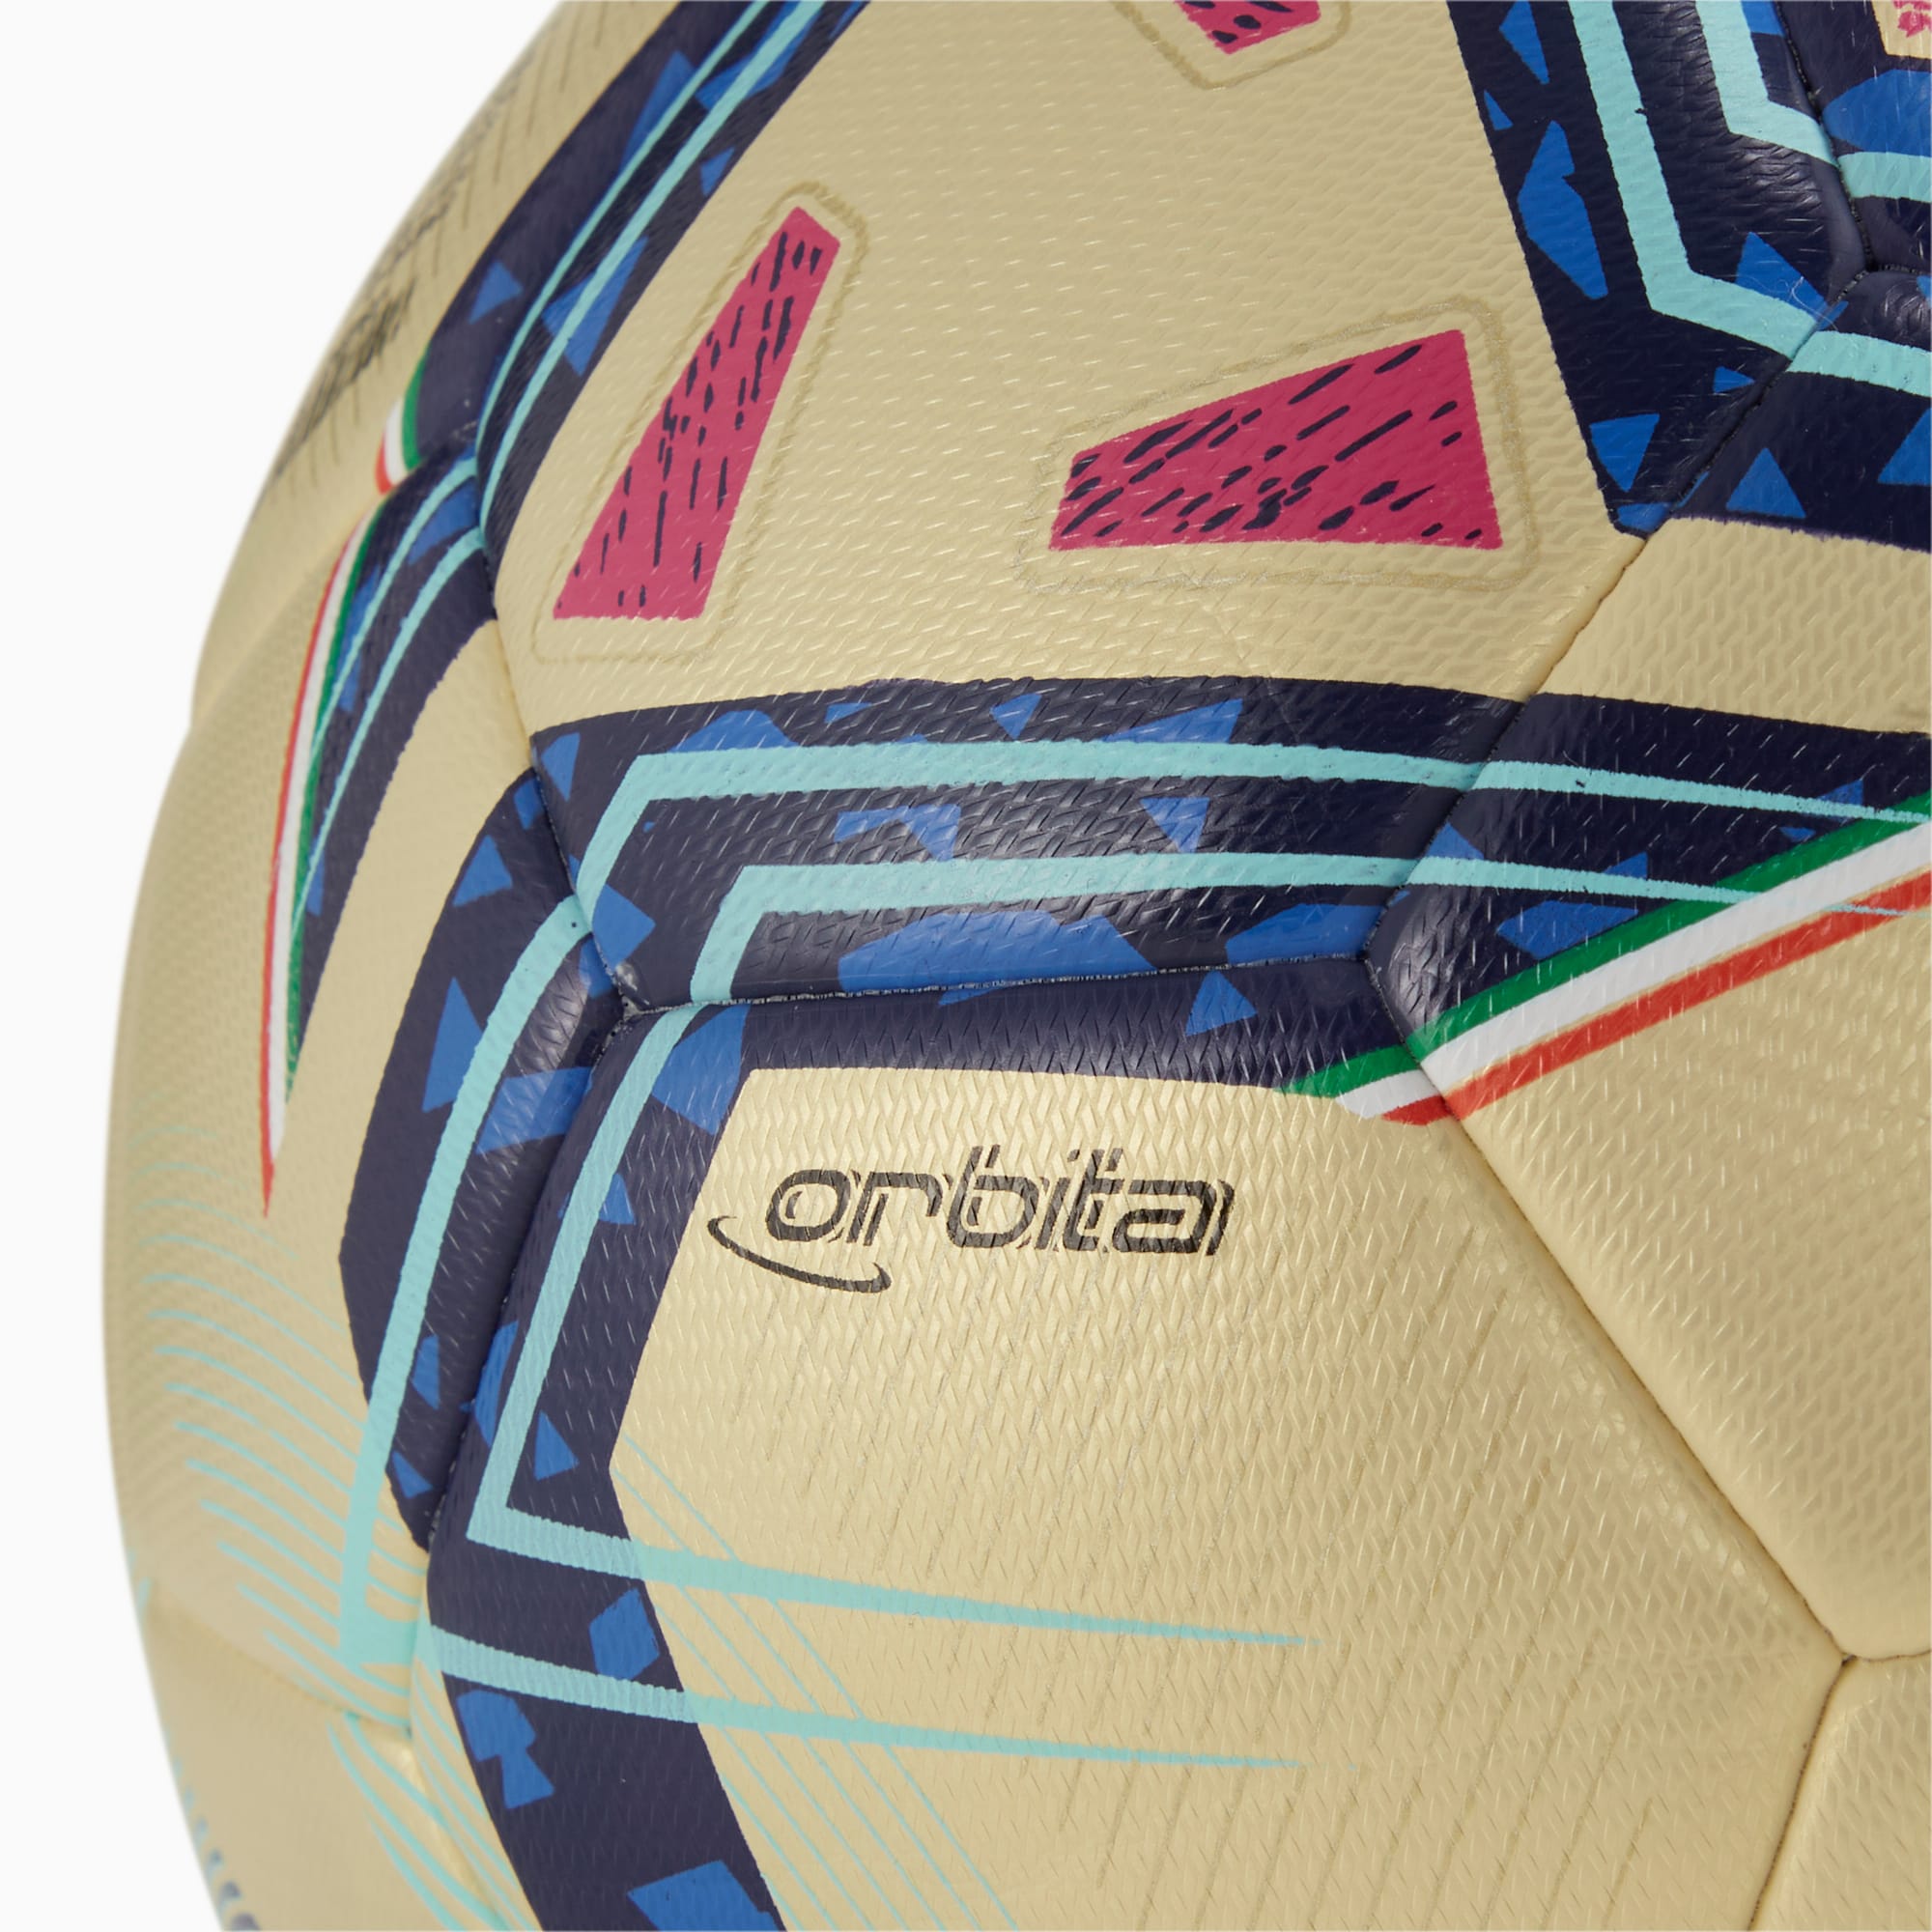 Women's PUMA Serie A Special Edition Hybrid Training Football, Gold/Blue Glimmer/Sunset Glow, Size 4, Accessories